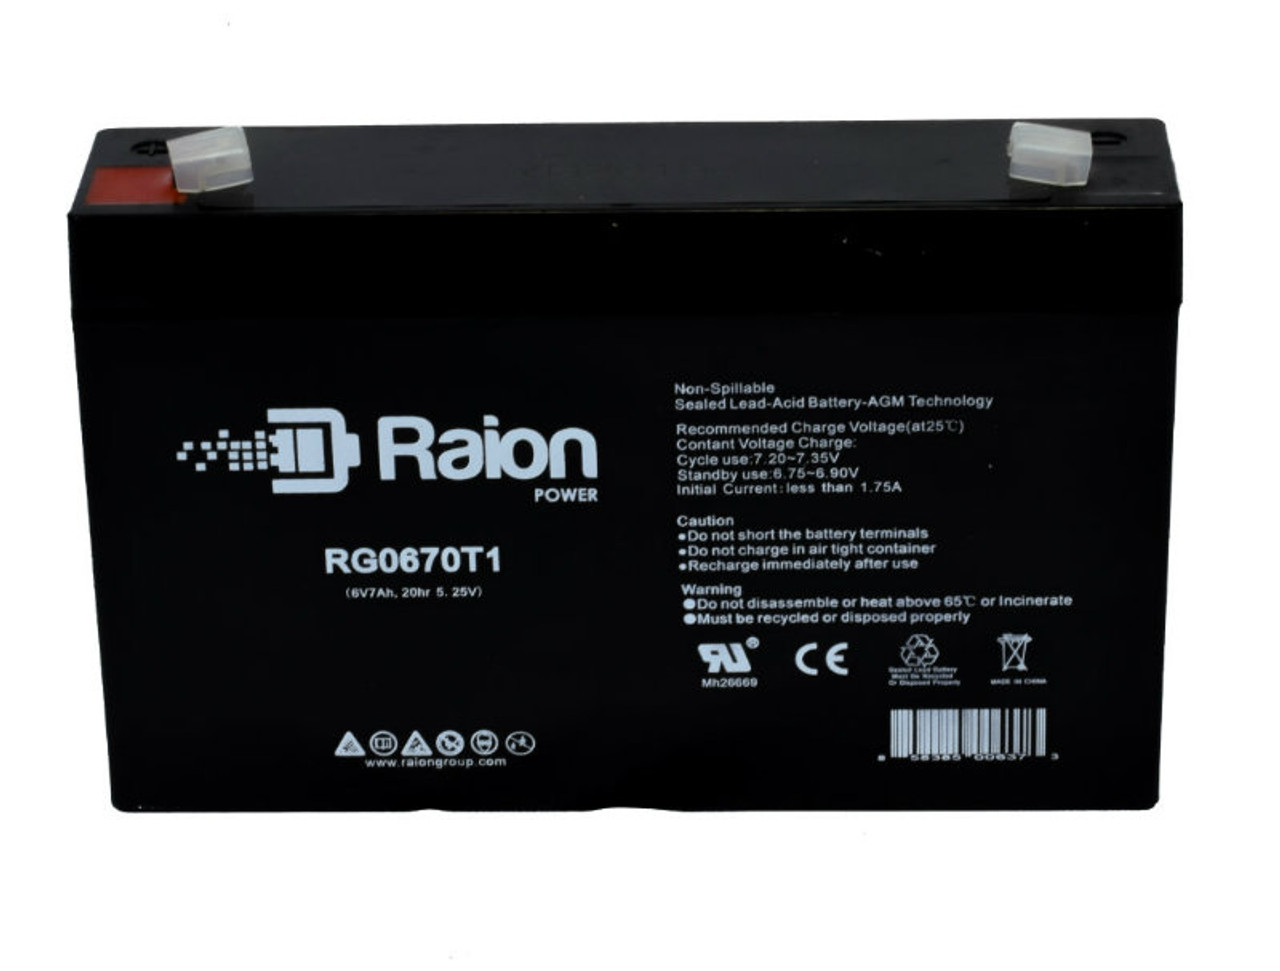 Raion Power RG0670T1 Replacement Battery Cartridge for Lightalarms LL6